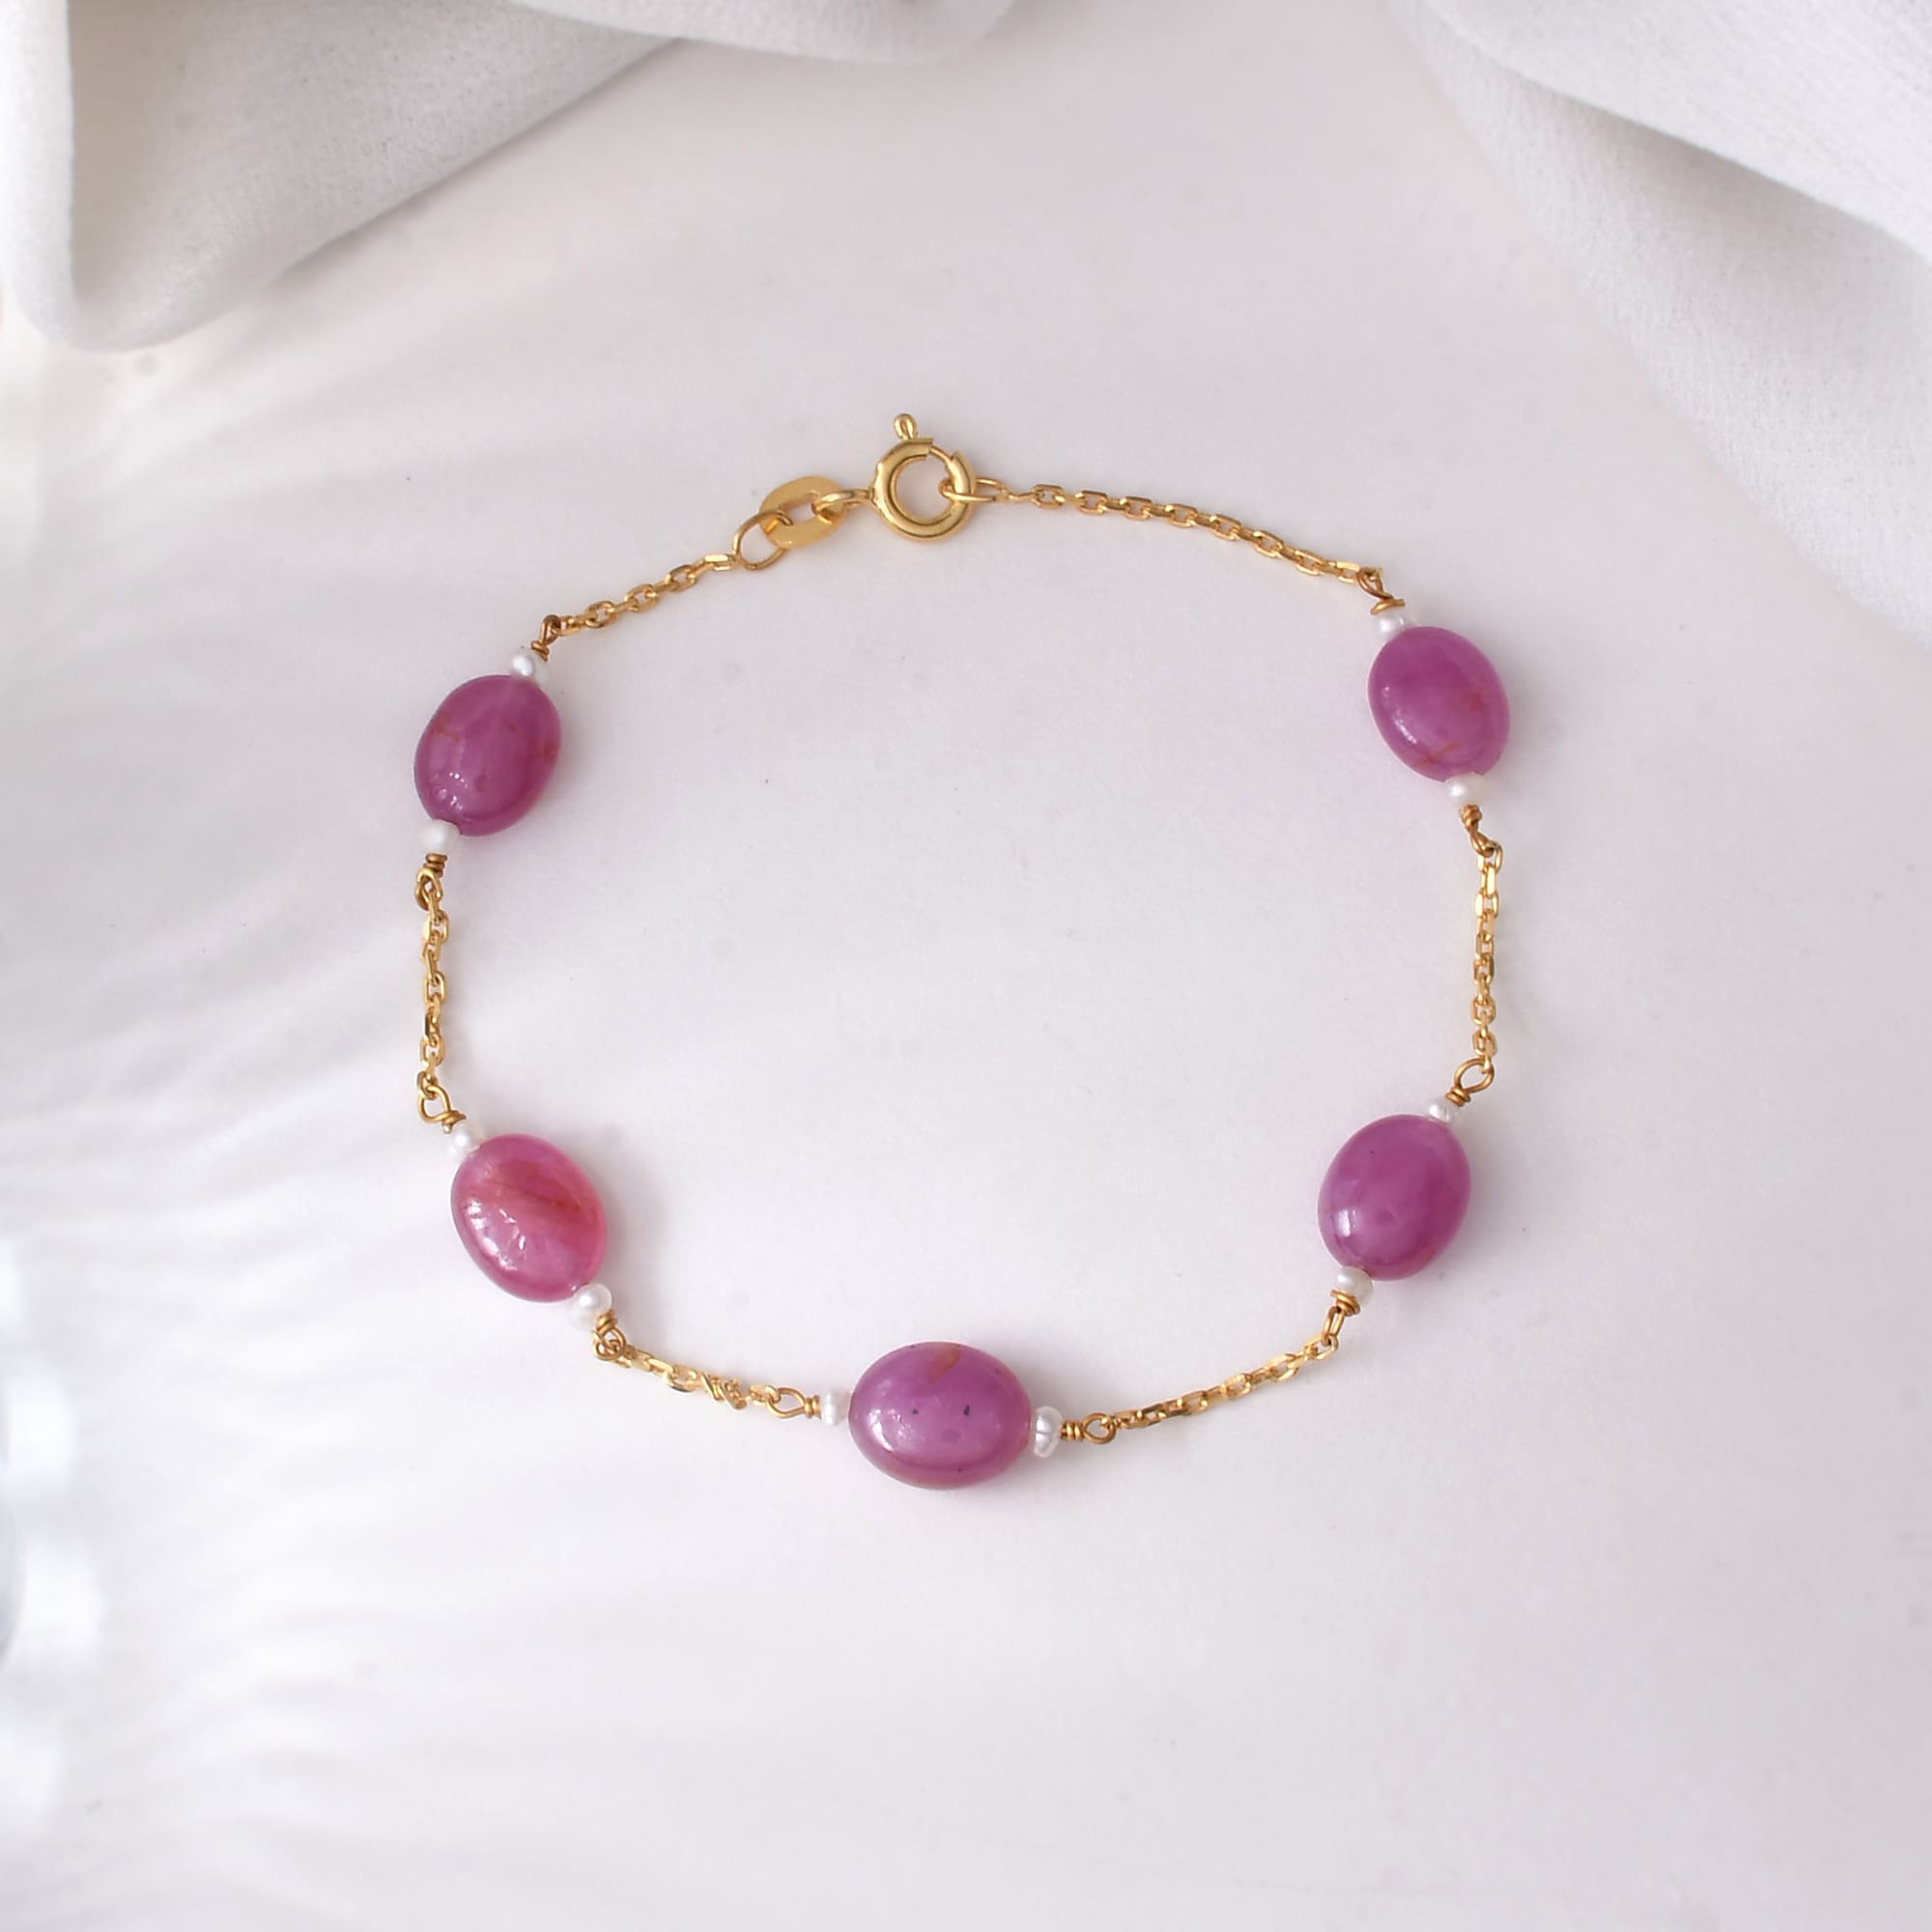 Ruby Bracelet with Small Pearls (22k) (7 inches)